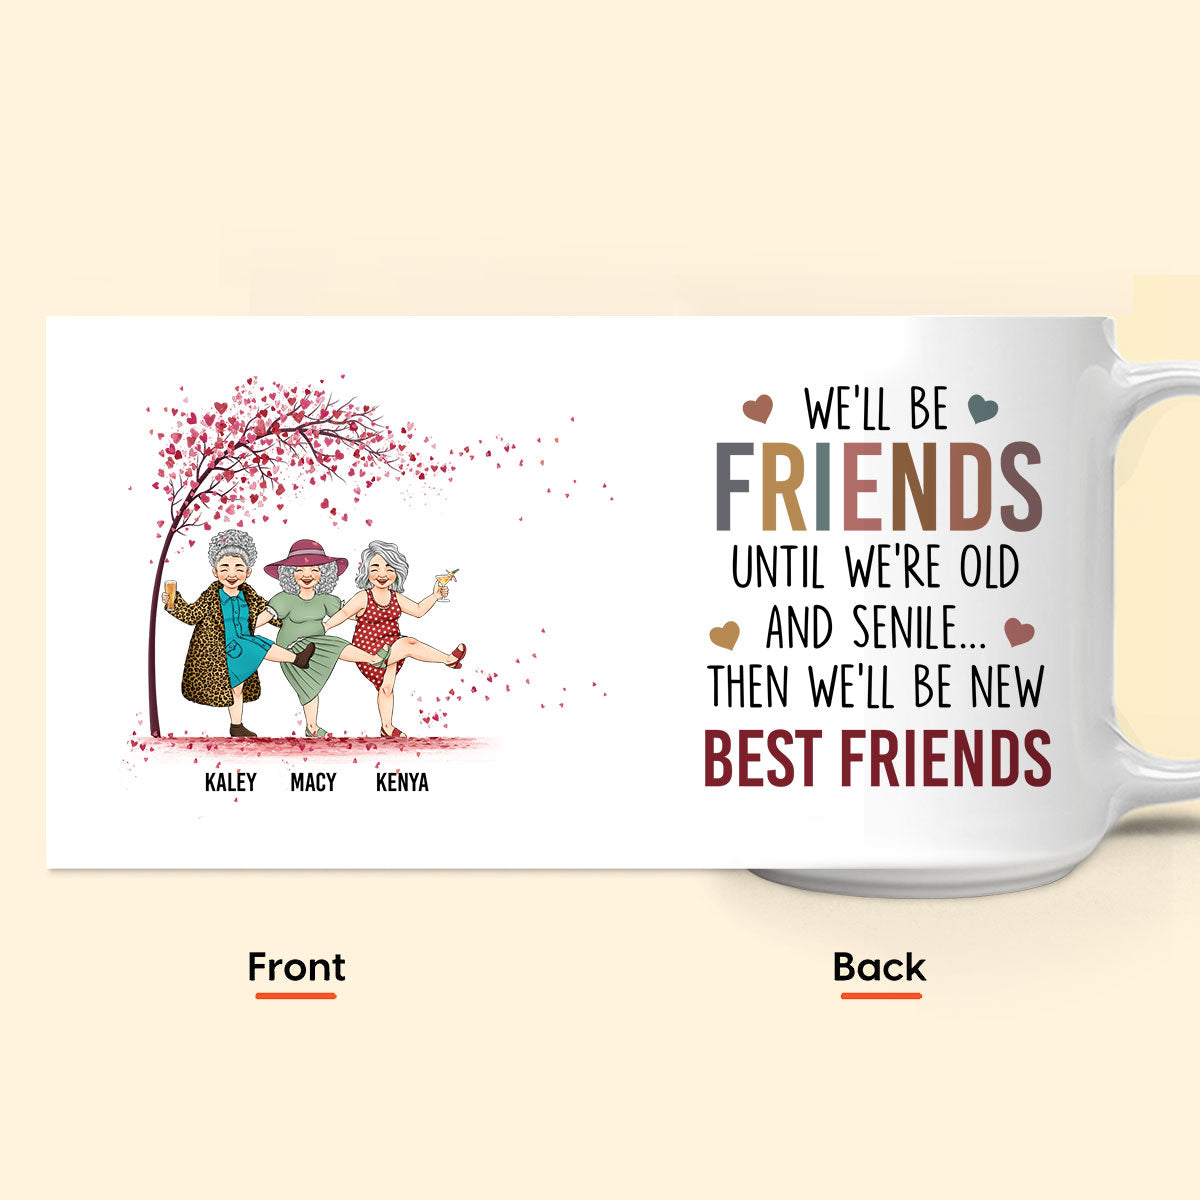 We'll Be Friends Until We're Old & Senile - Personalized Mug